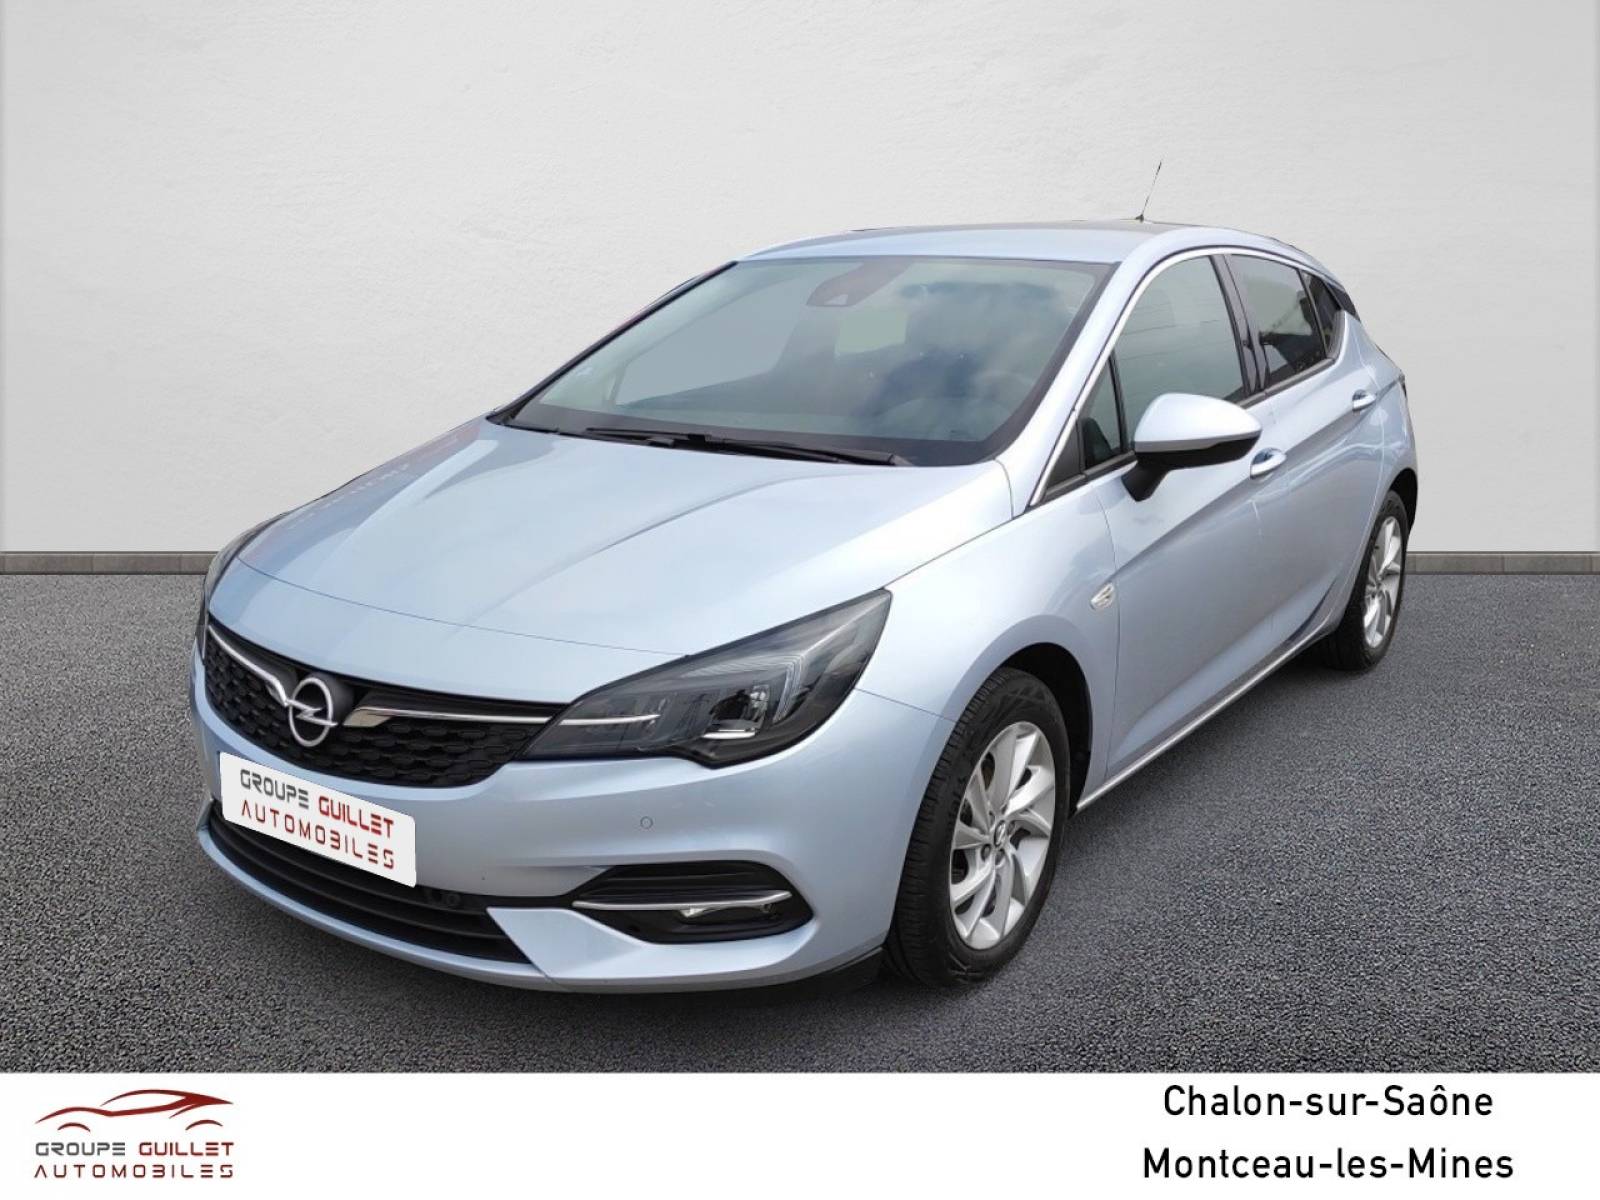 OPEL Astra 1.2 Turbo 130 ch BVM6 - véhicule d'occasion - Groupe Guillet - Opel Magicauto Chalon - 71380 - Saint-Marcel - 1